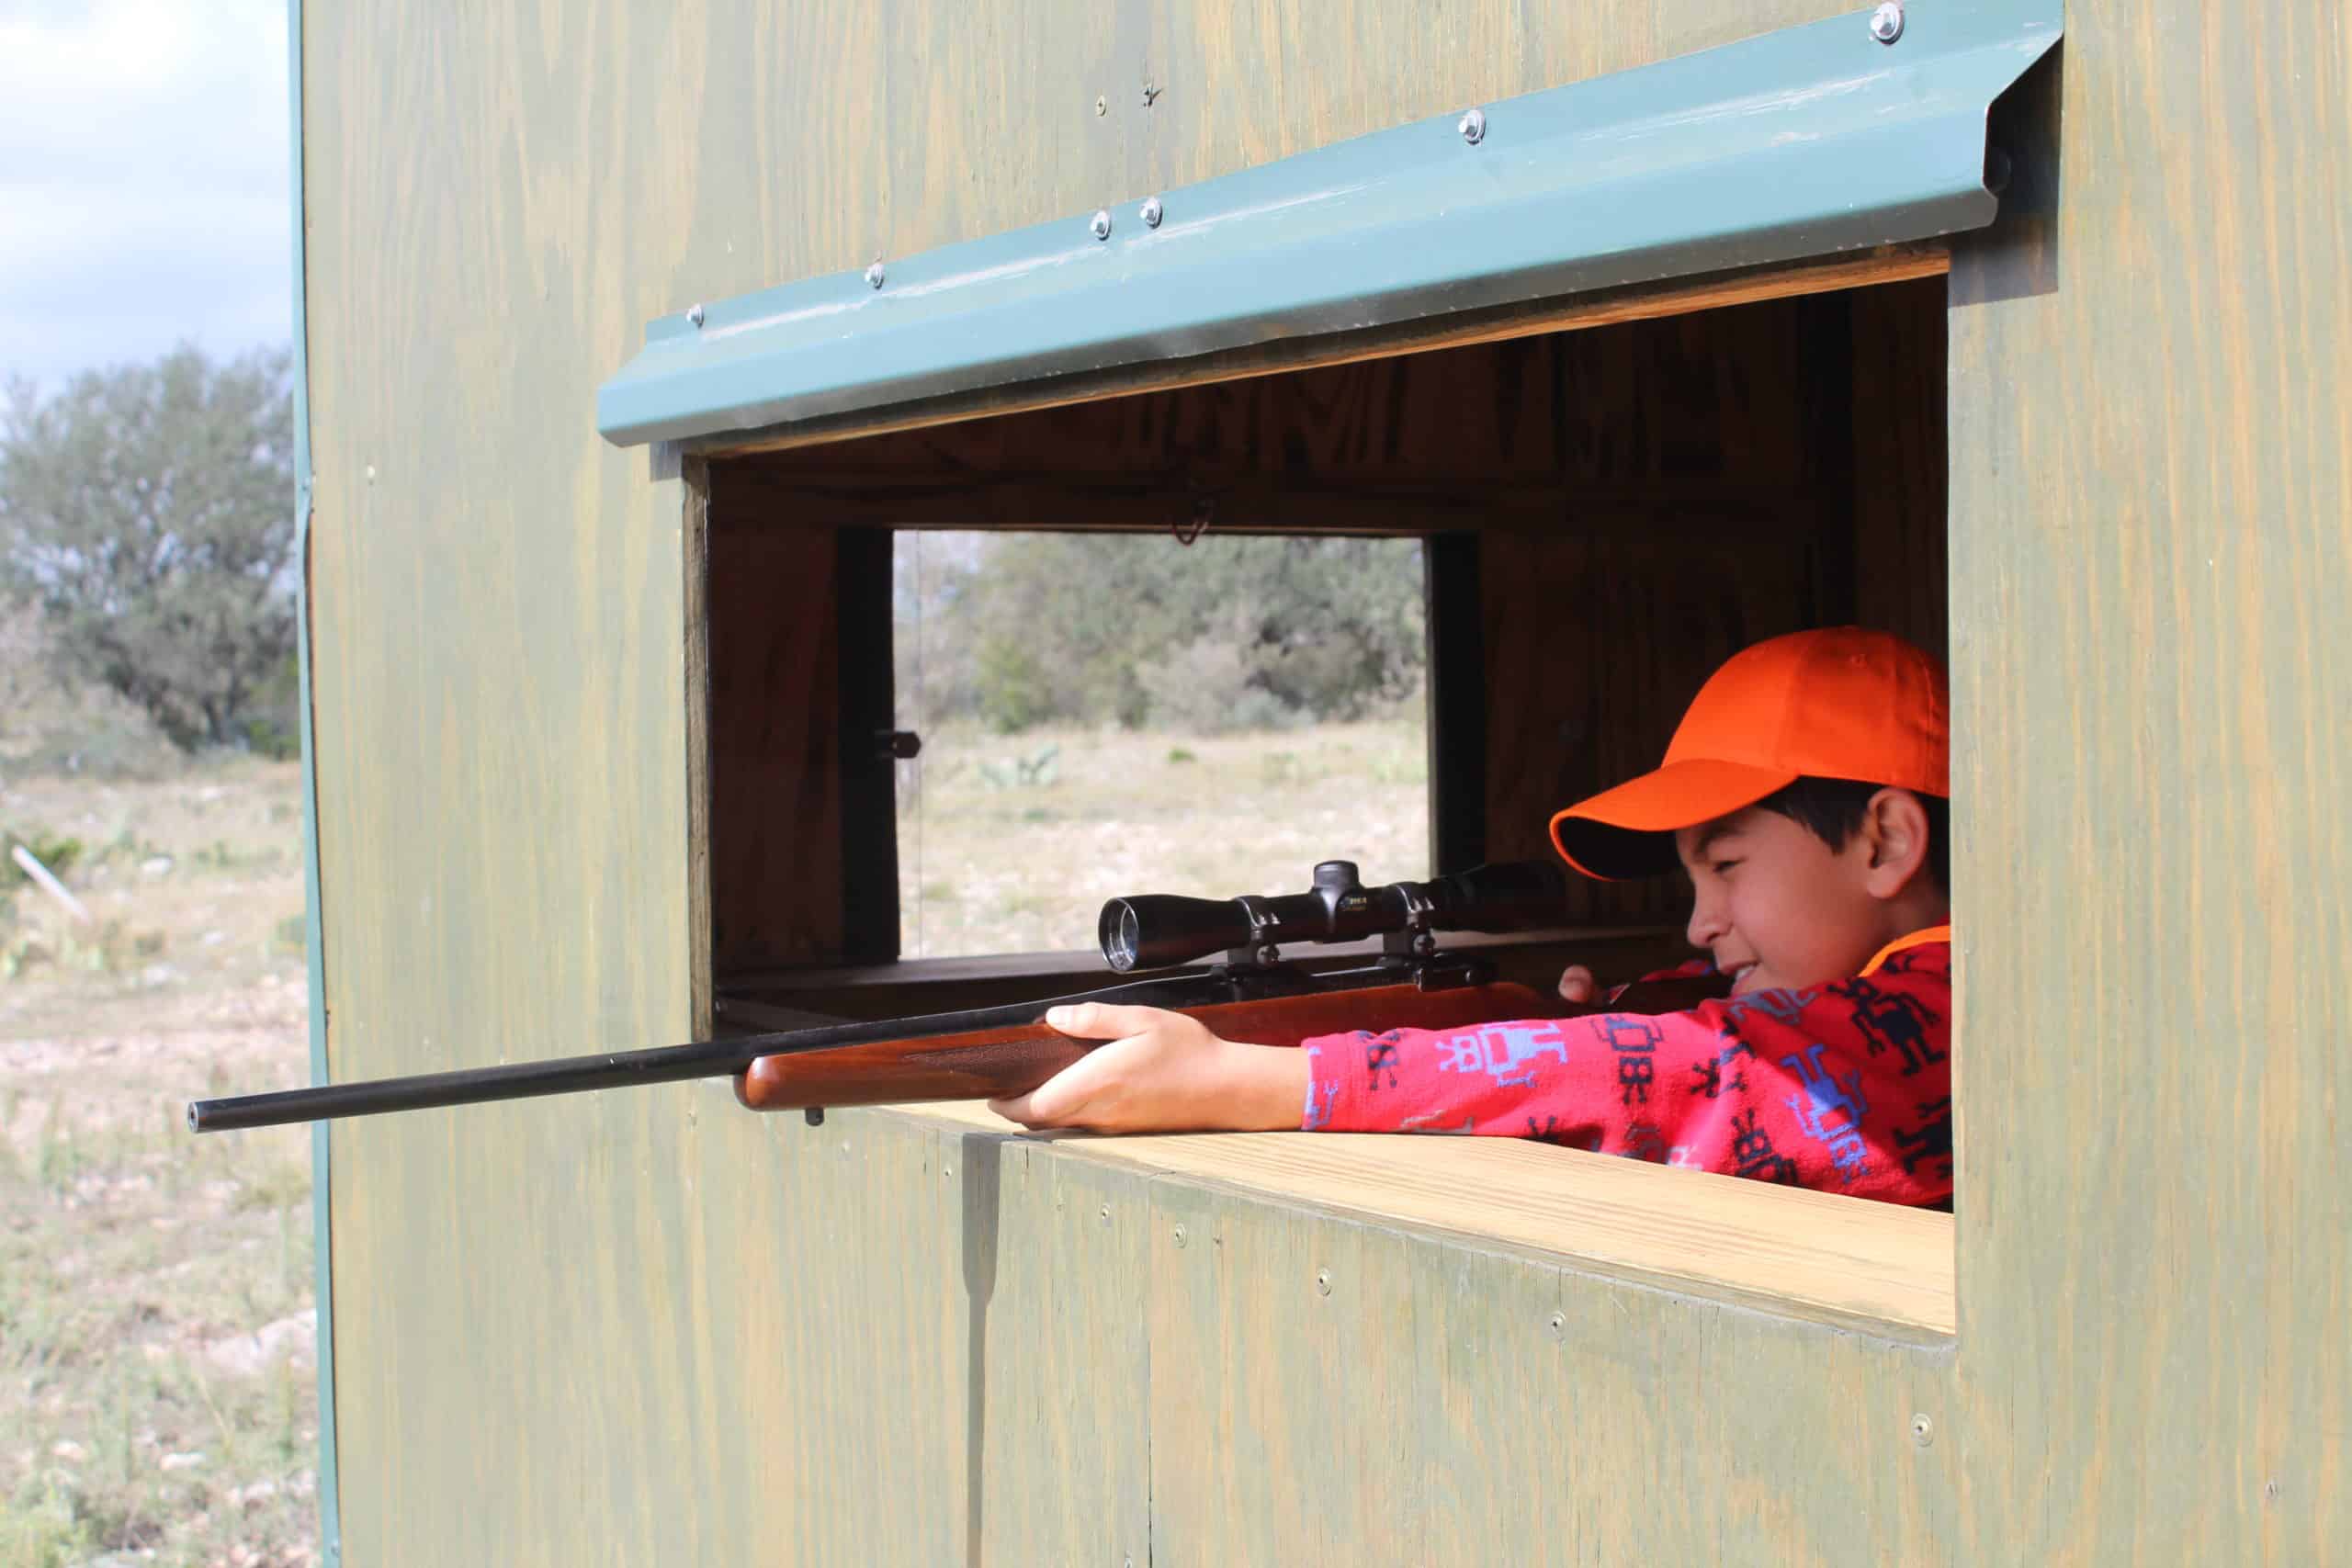 Josh Kelly, 9, of Garden Ridge, Texas, sets his sights on a target from a custom deer blind in the Texas Hill Country. The successful completion of this USA’s Work Boots on the Ground conservation project, in partnership with volunteers and donations from the Houston-area Union community, affords kids with mobility issues to experience the thrill of the hunt safely and comfortably. 